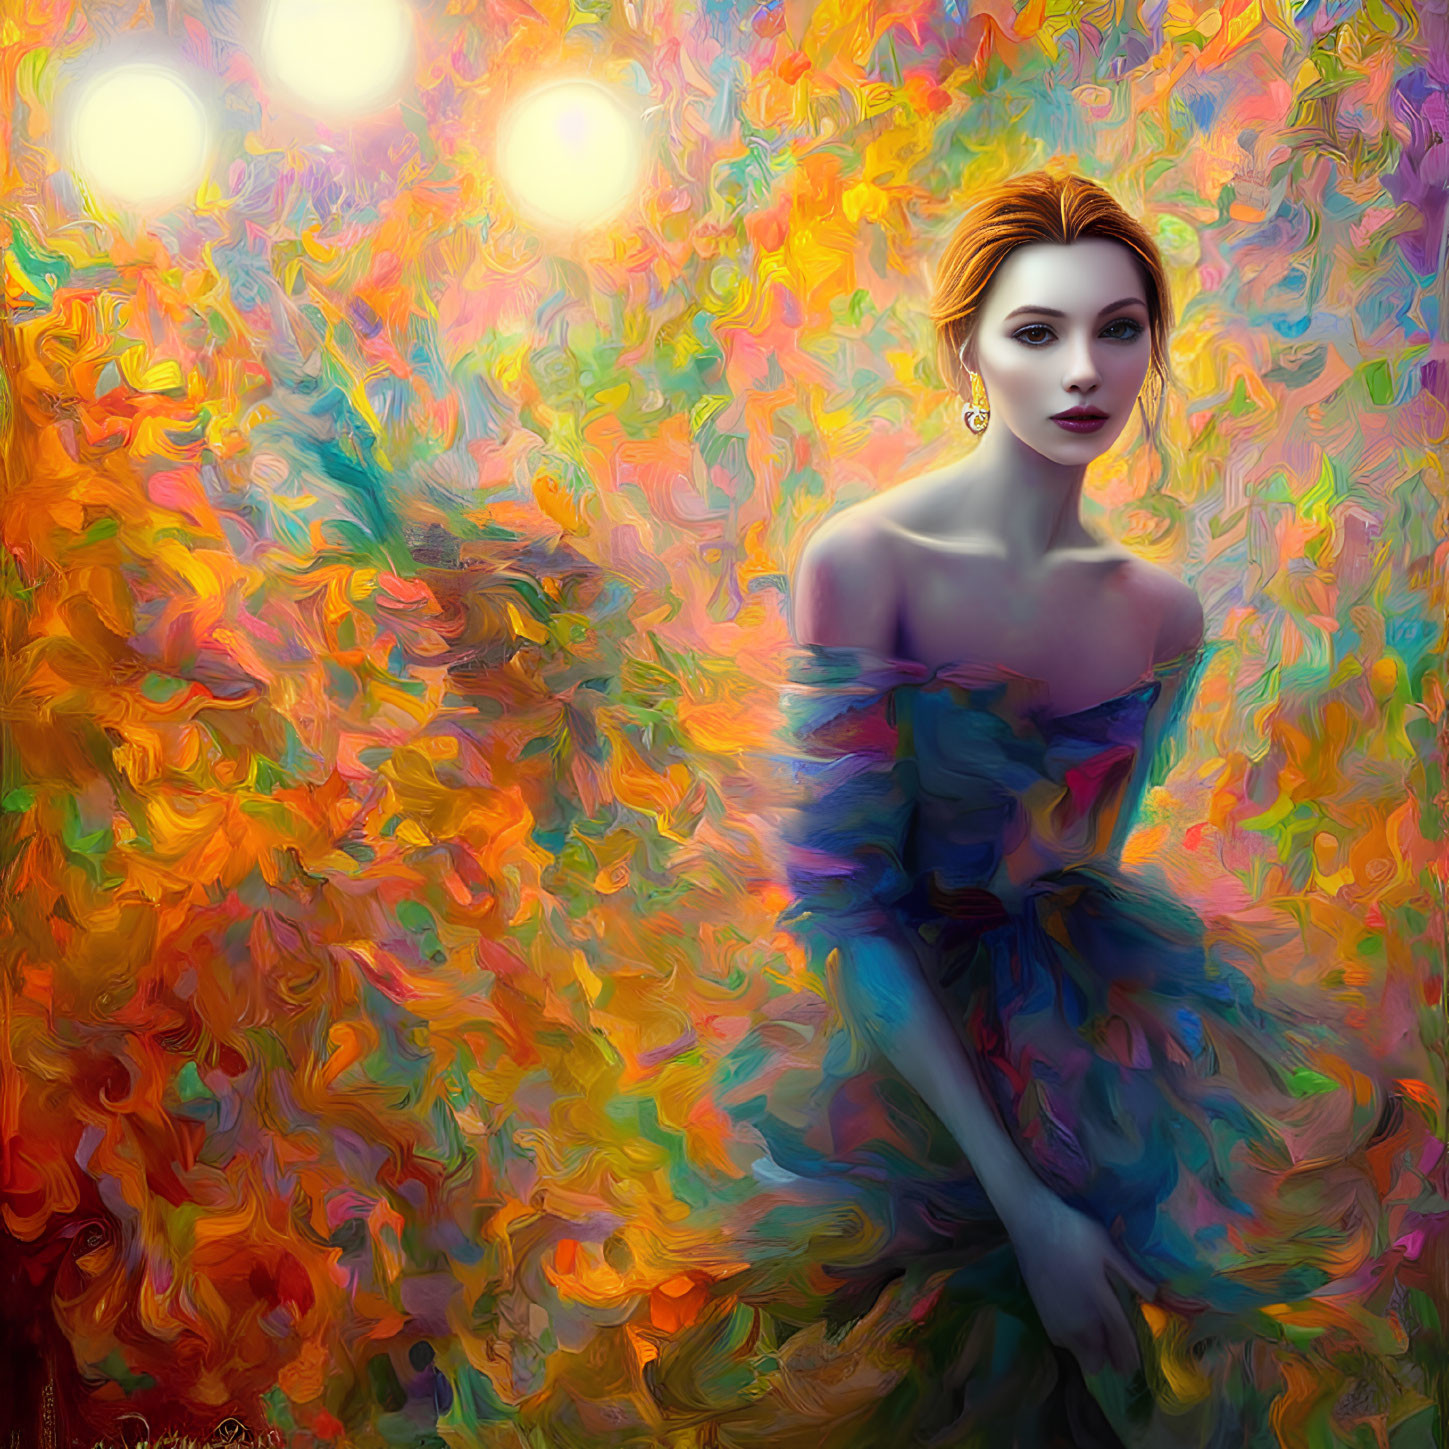 Elegant Woman Surrounded by Vivid Swirling Colors